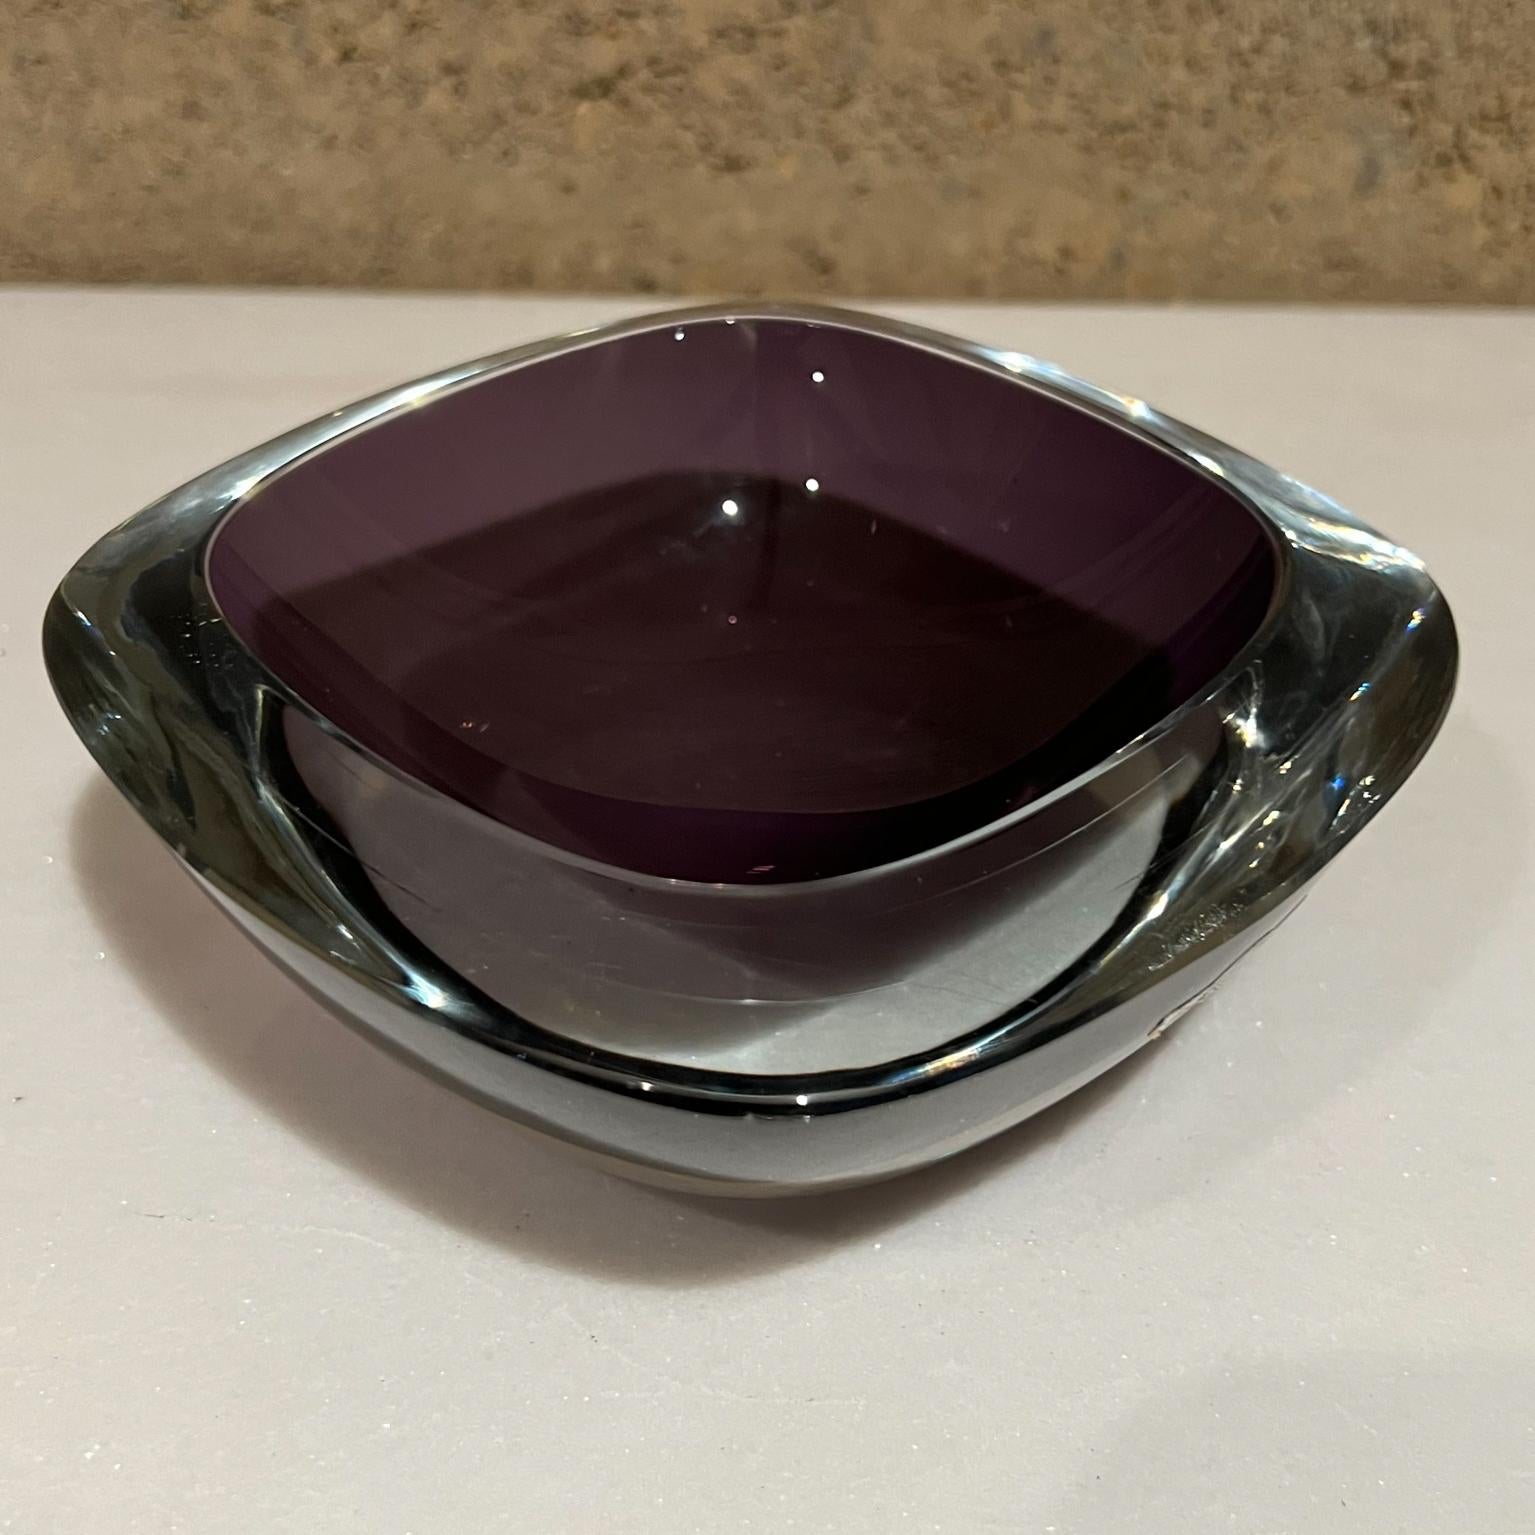 1960s Strombergshyttan Sweden amethyst sommerso double art purple glass bowl. 
Measures: 2 tall x 5.13 x 5.13.
Bowl, Ashtray or catch all dish.
Thick glass.
Retains original label. Vintage unrestored original condition. Expect signs of vintage